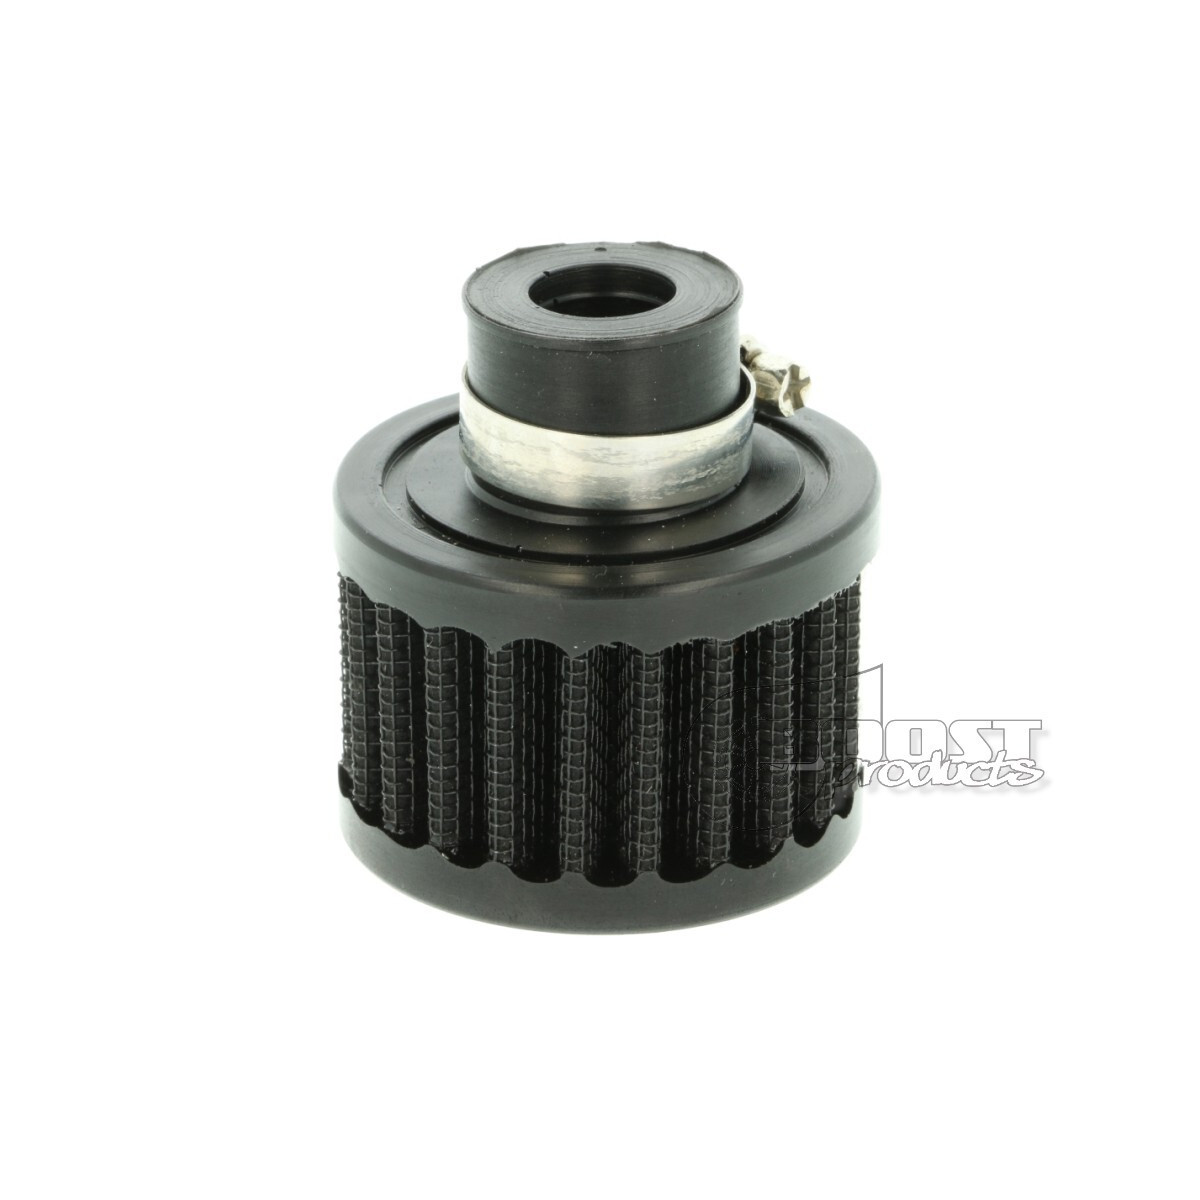 BOOST Products air filter small with 12mm connection, black